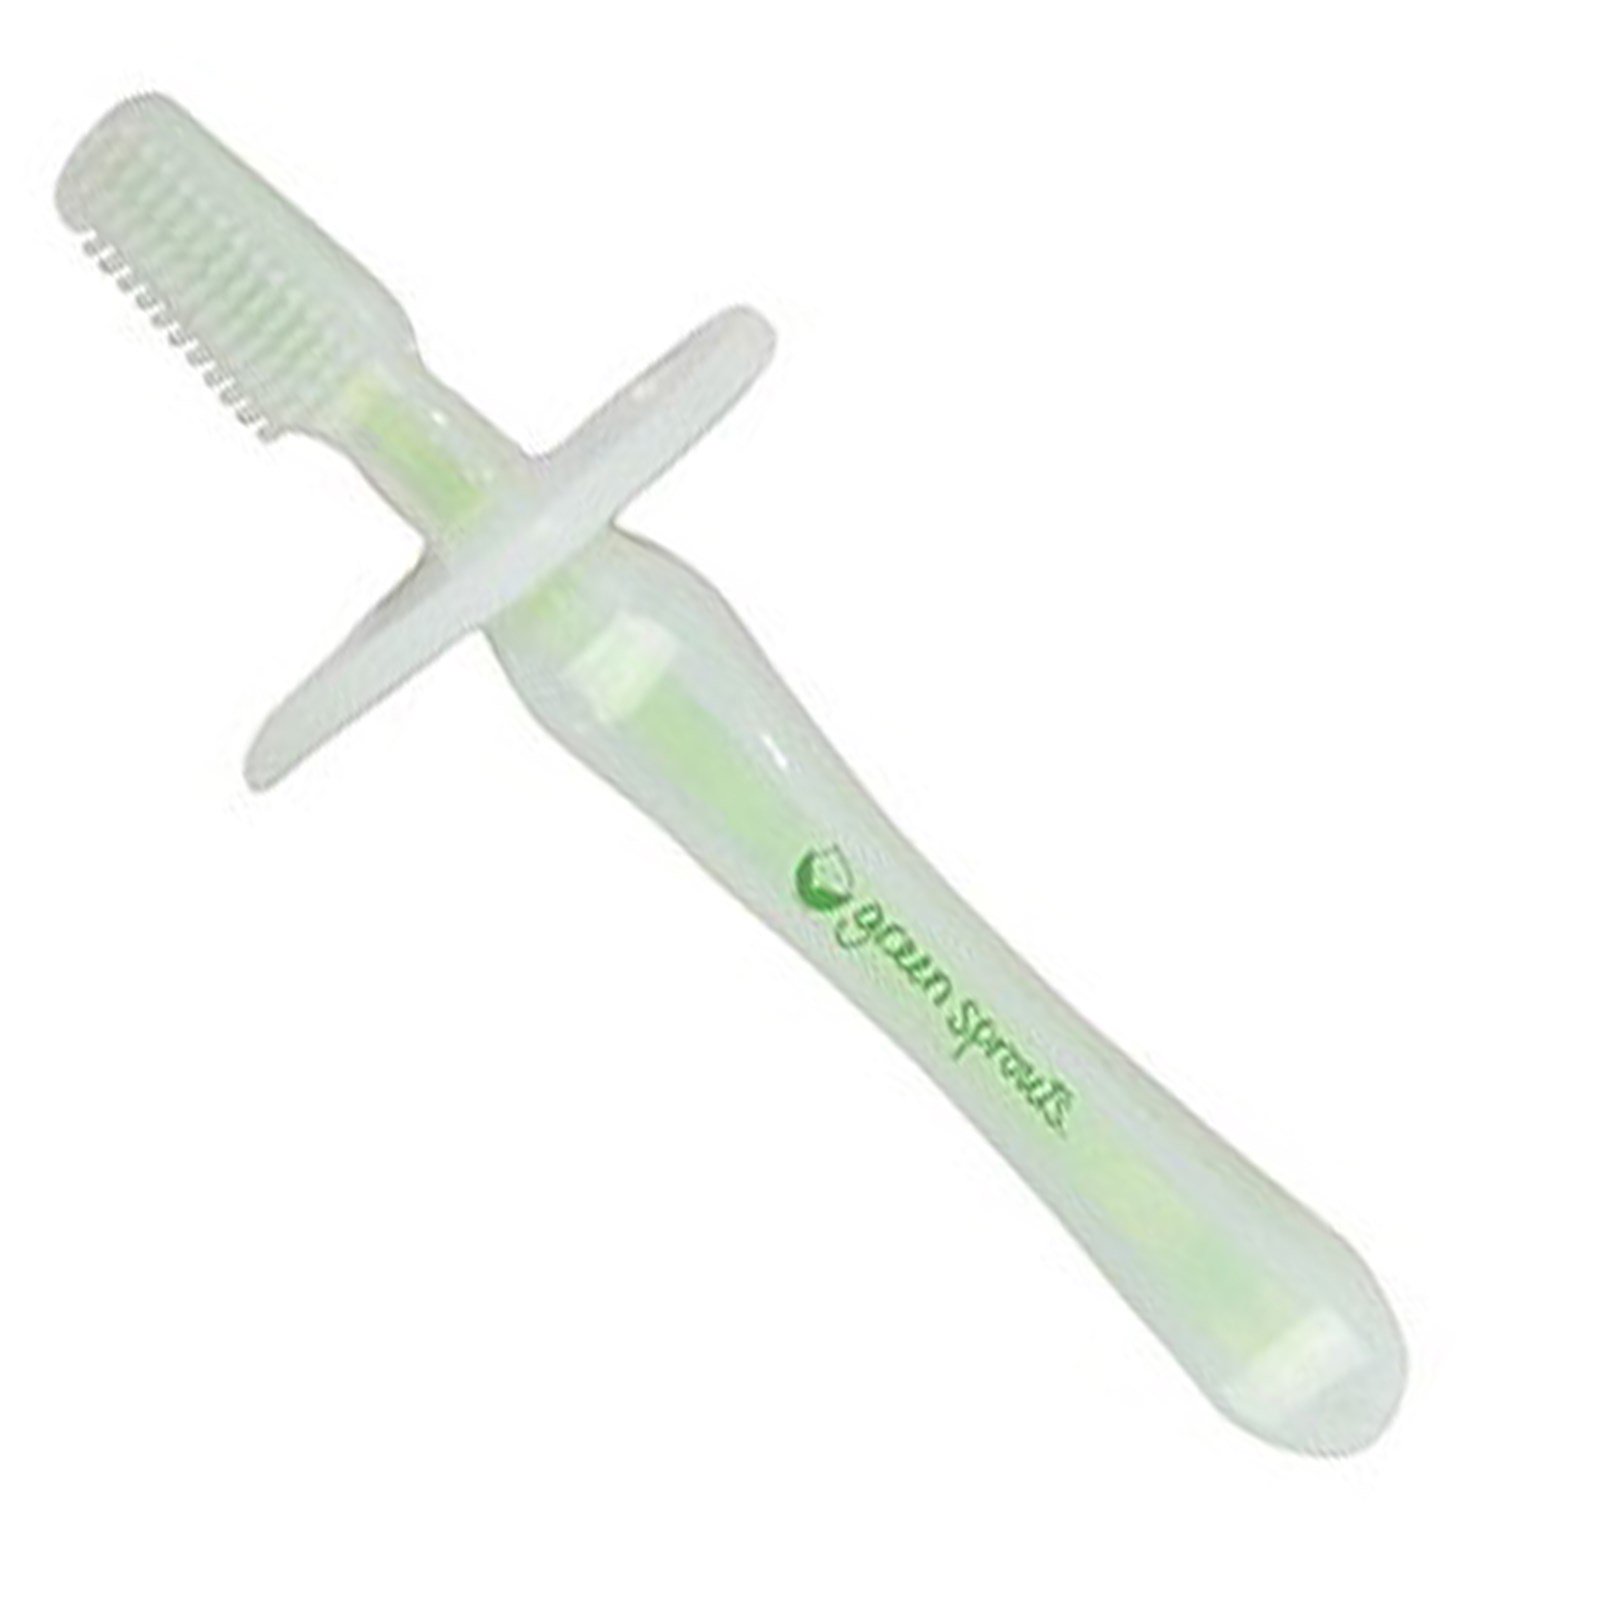 green sprouts silicone toothbrush